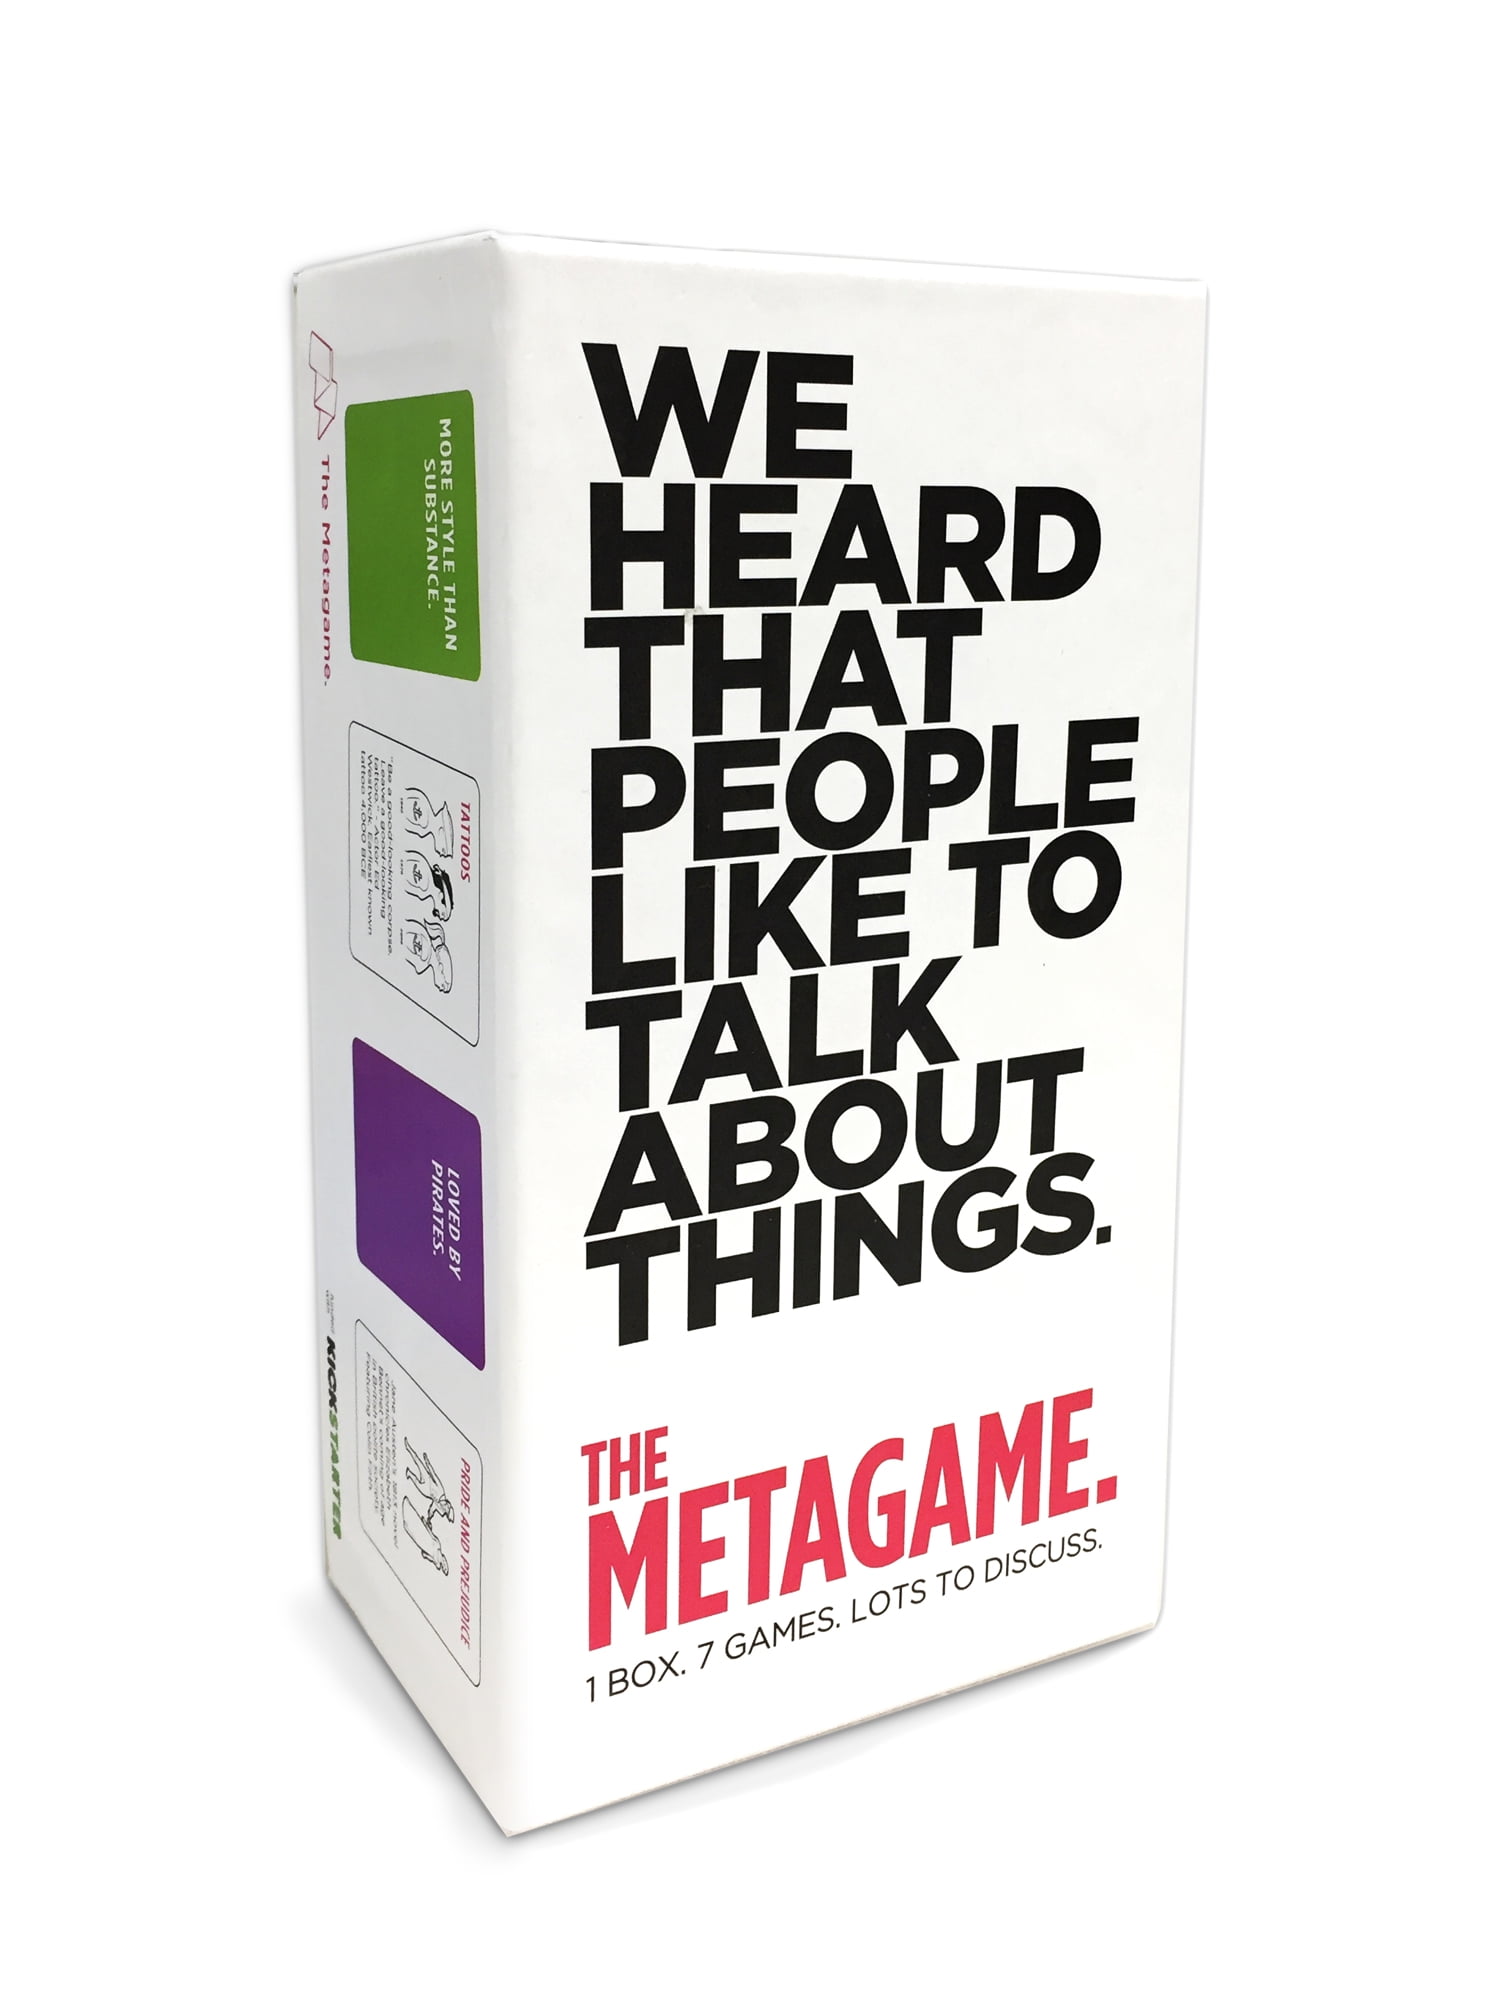 The Metagame: A card game for sharing opinions on almost everything.